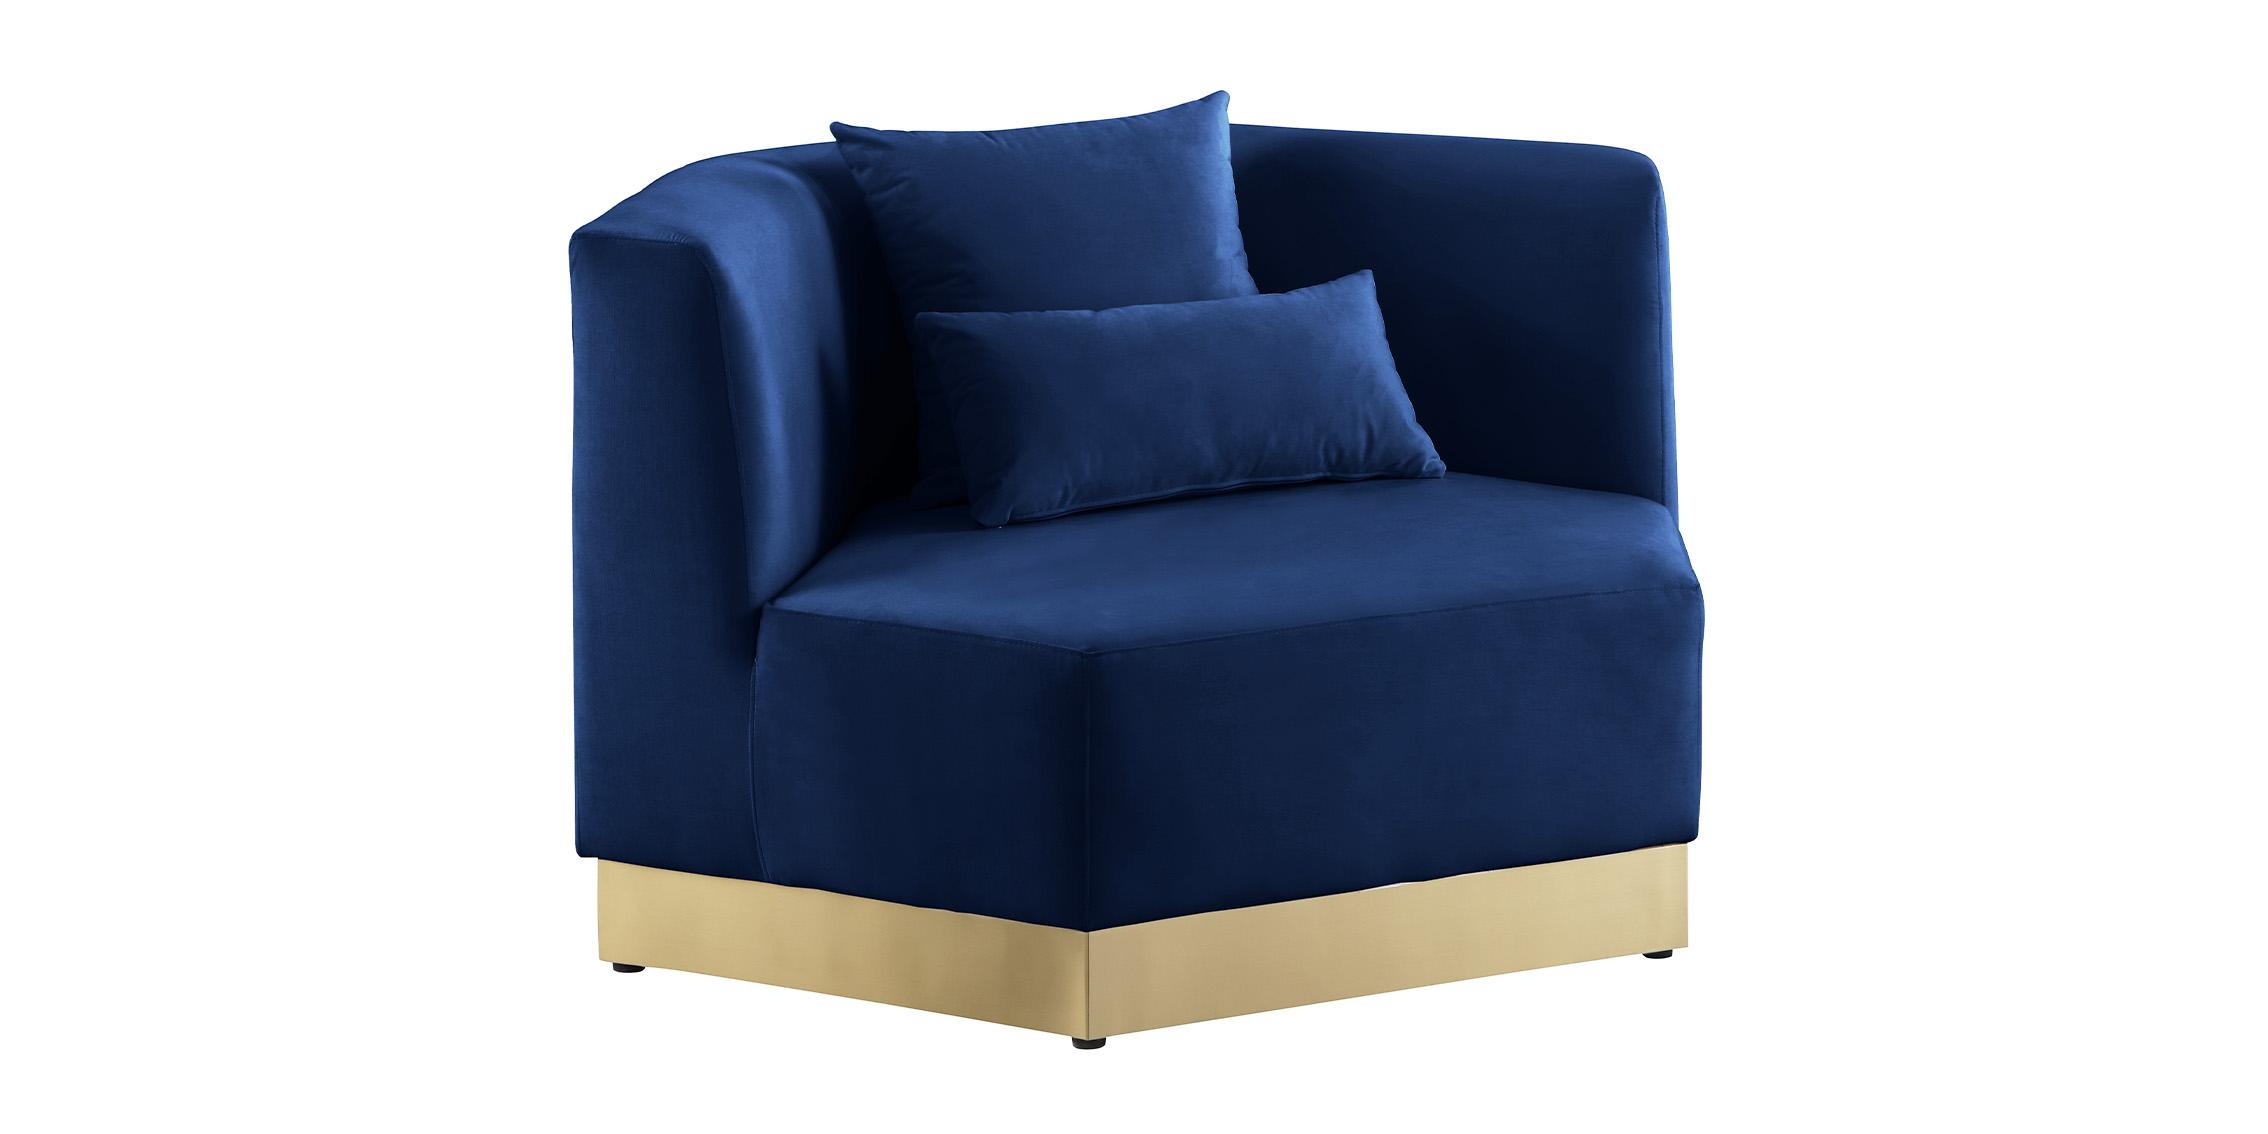 Contemporary, Modern Arm Chairs MARQUIS 600Navy-C 600Navy-C in Navy blue Velvet